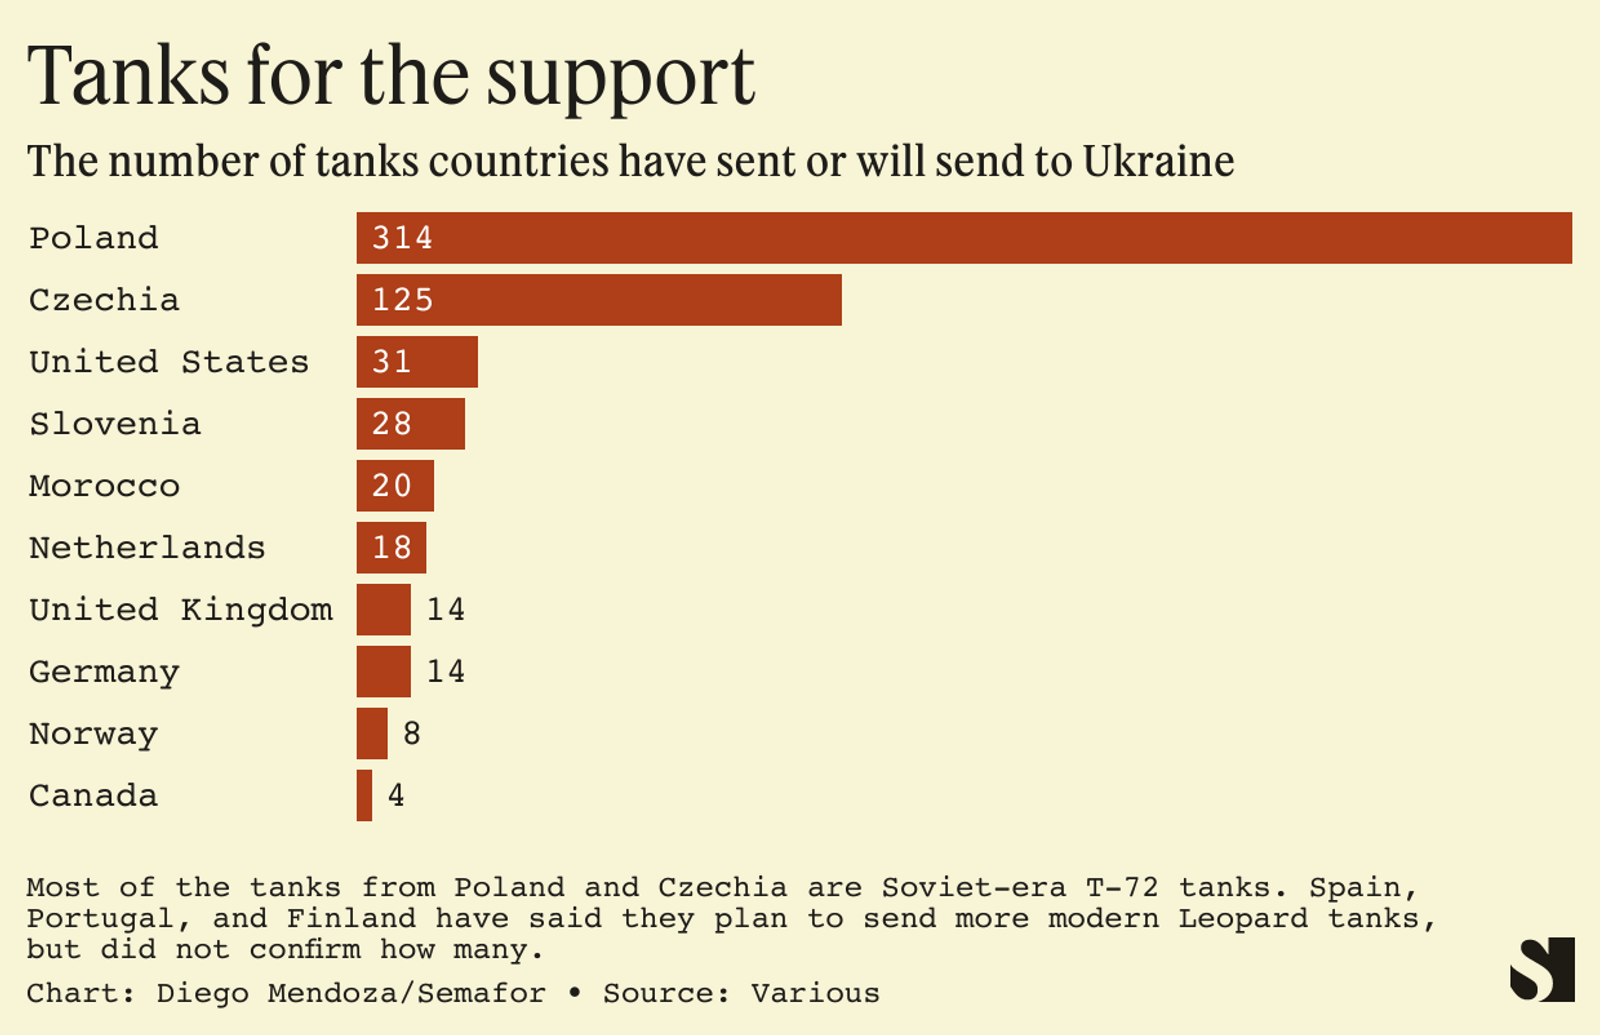 Number of tanks to Ukraine from different countries